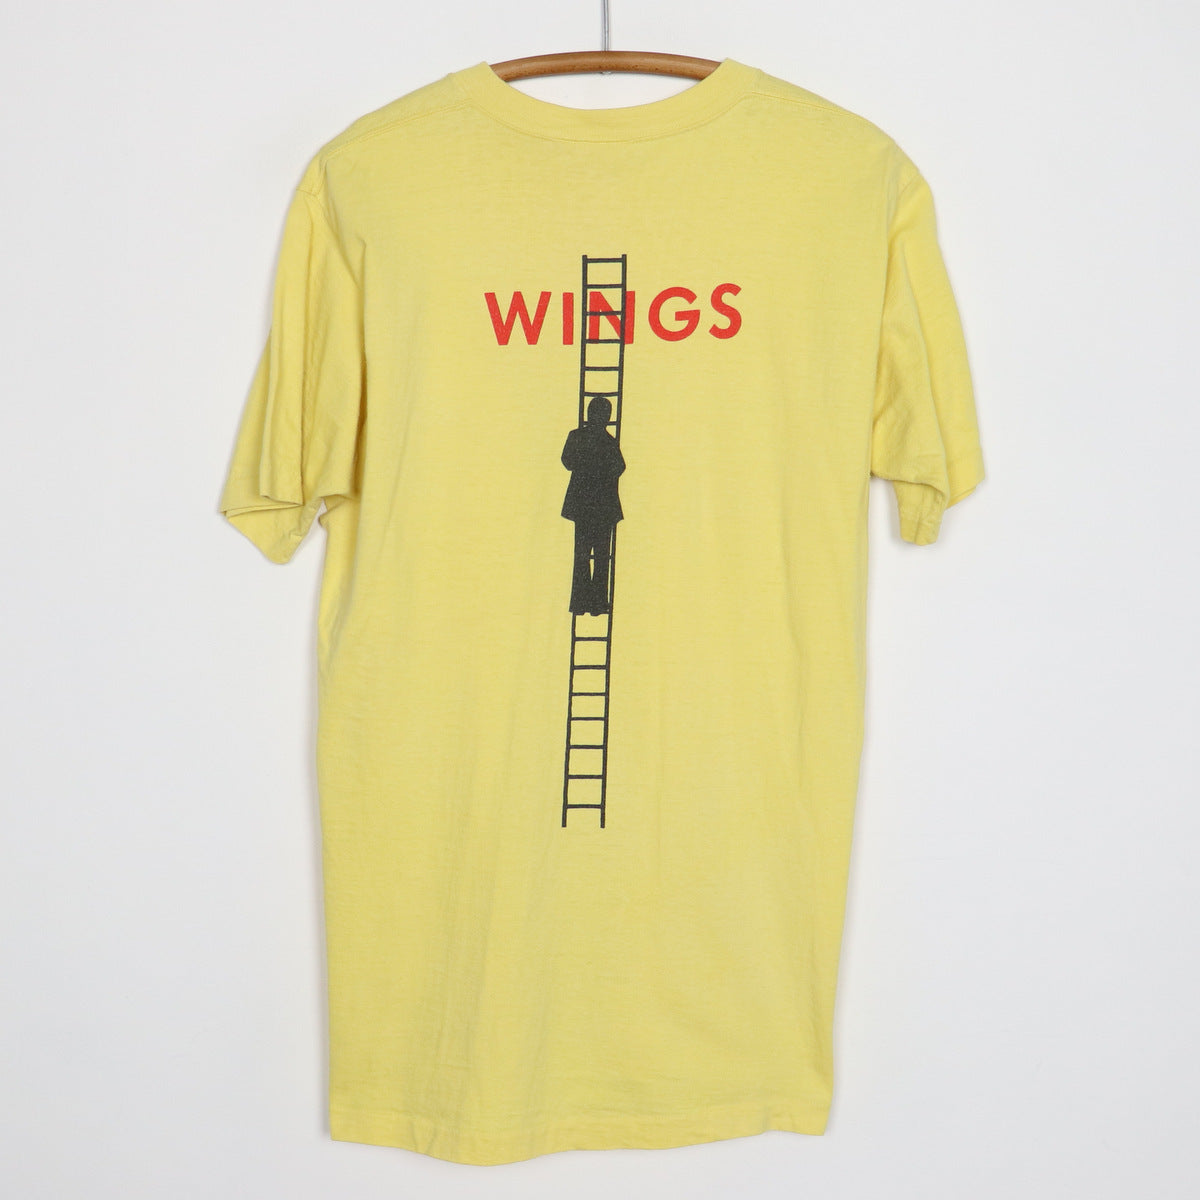 1975 Wings Capitol Records Promo Shirt